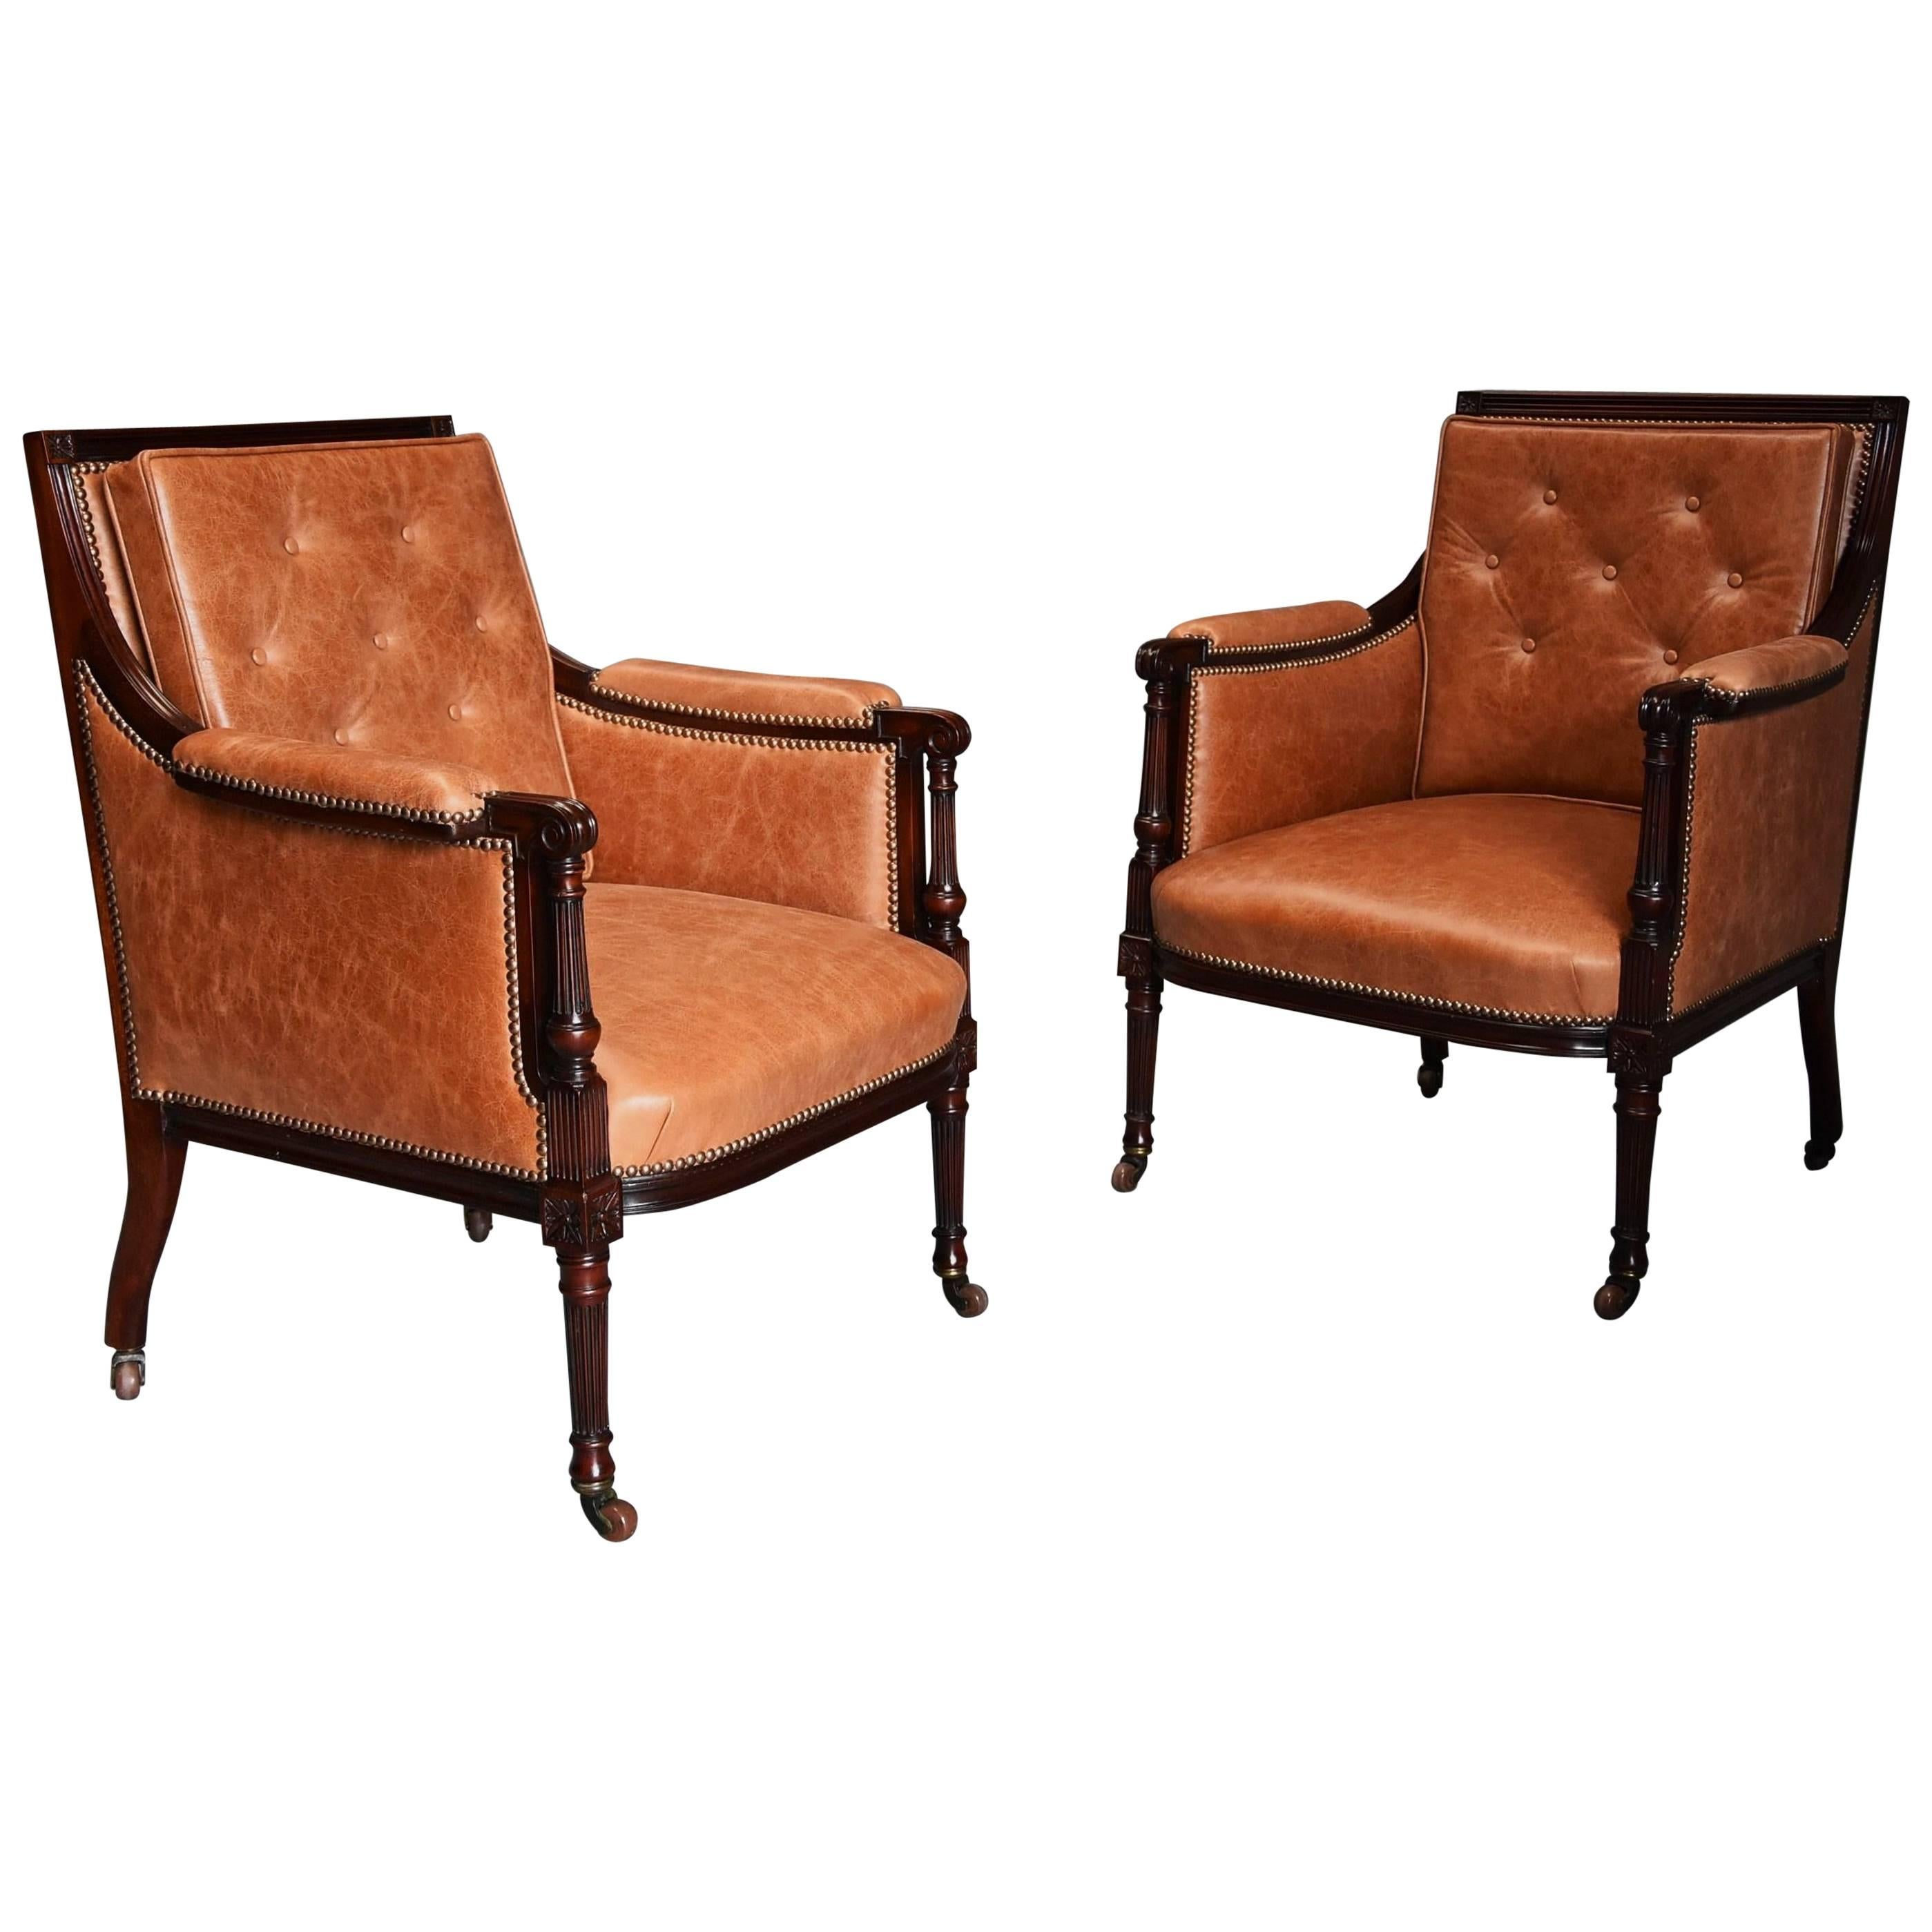 Superb Pair of Late 19th Century ‘His & Hers’ Mahogany Bergere Library Chairs